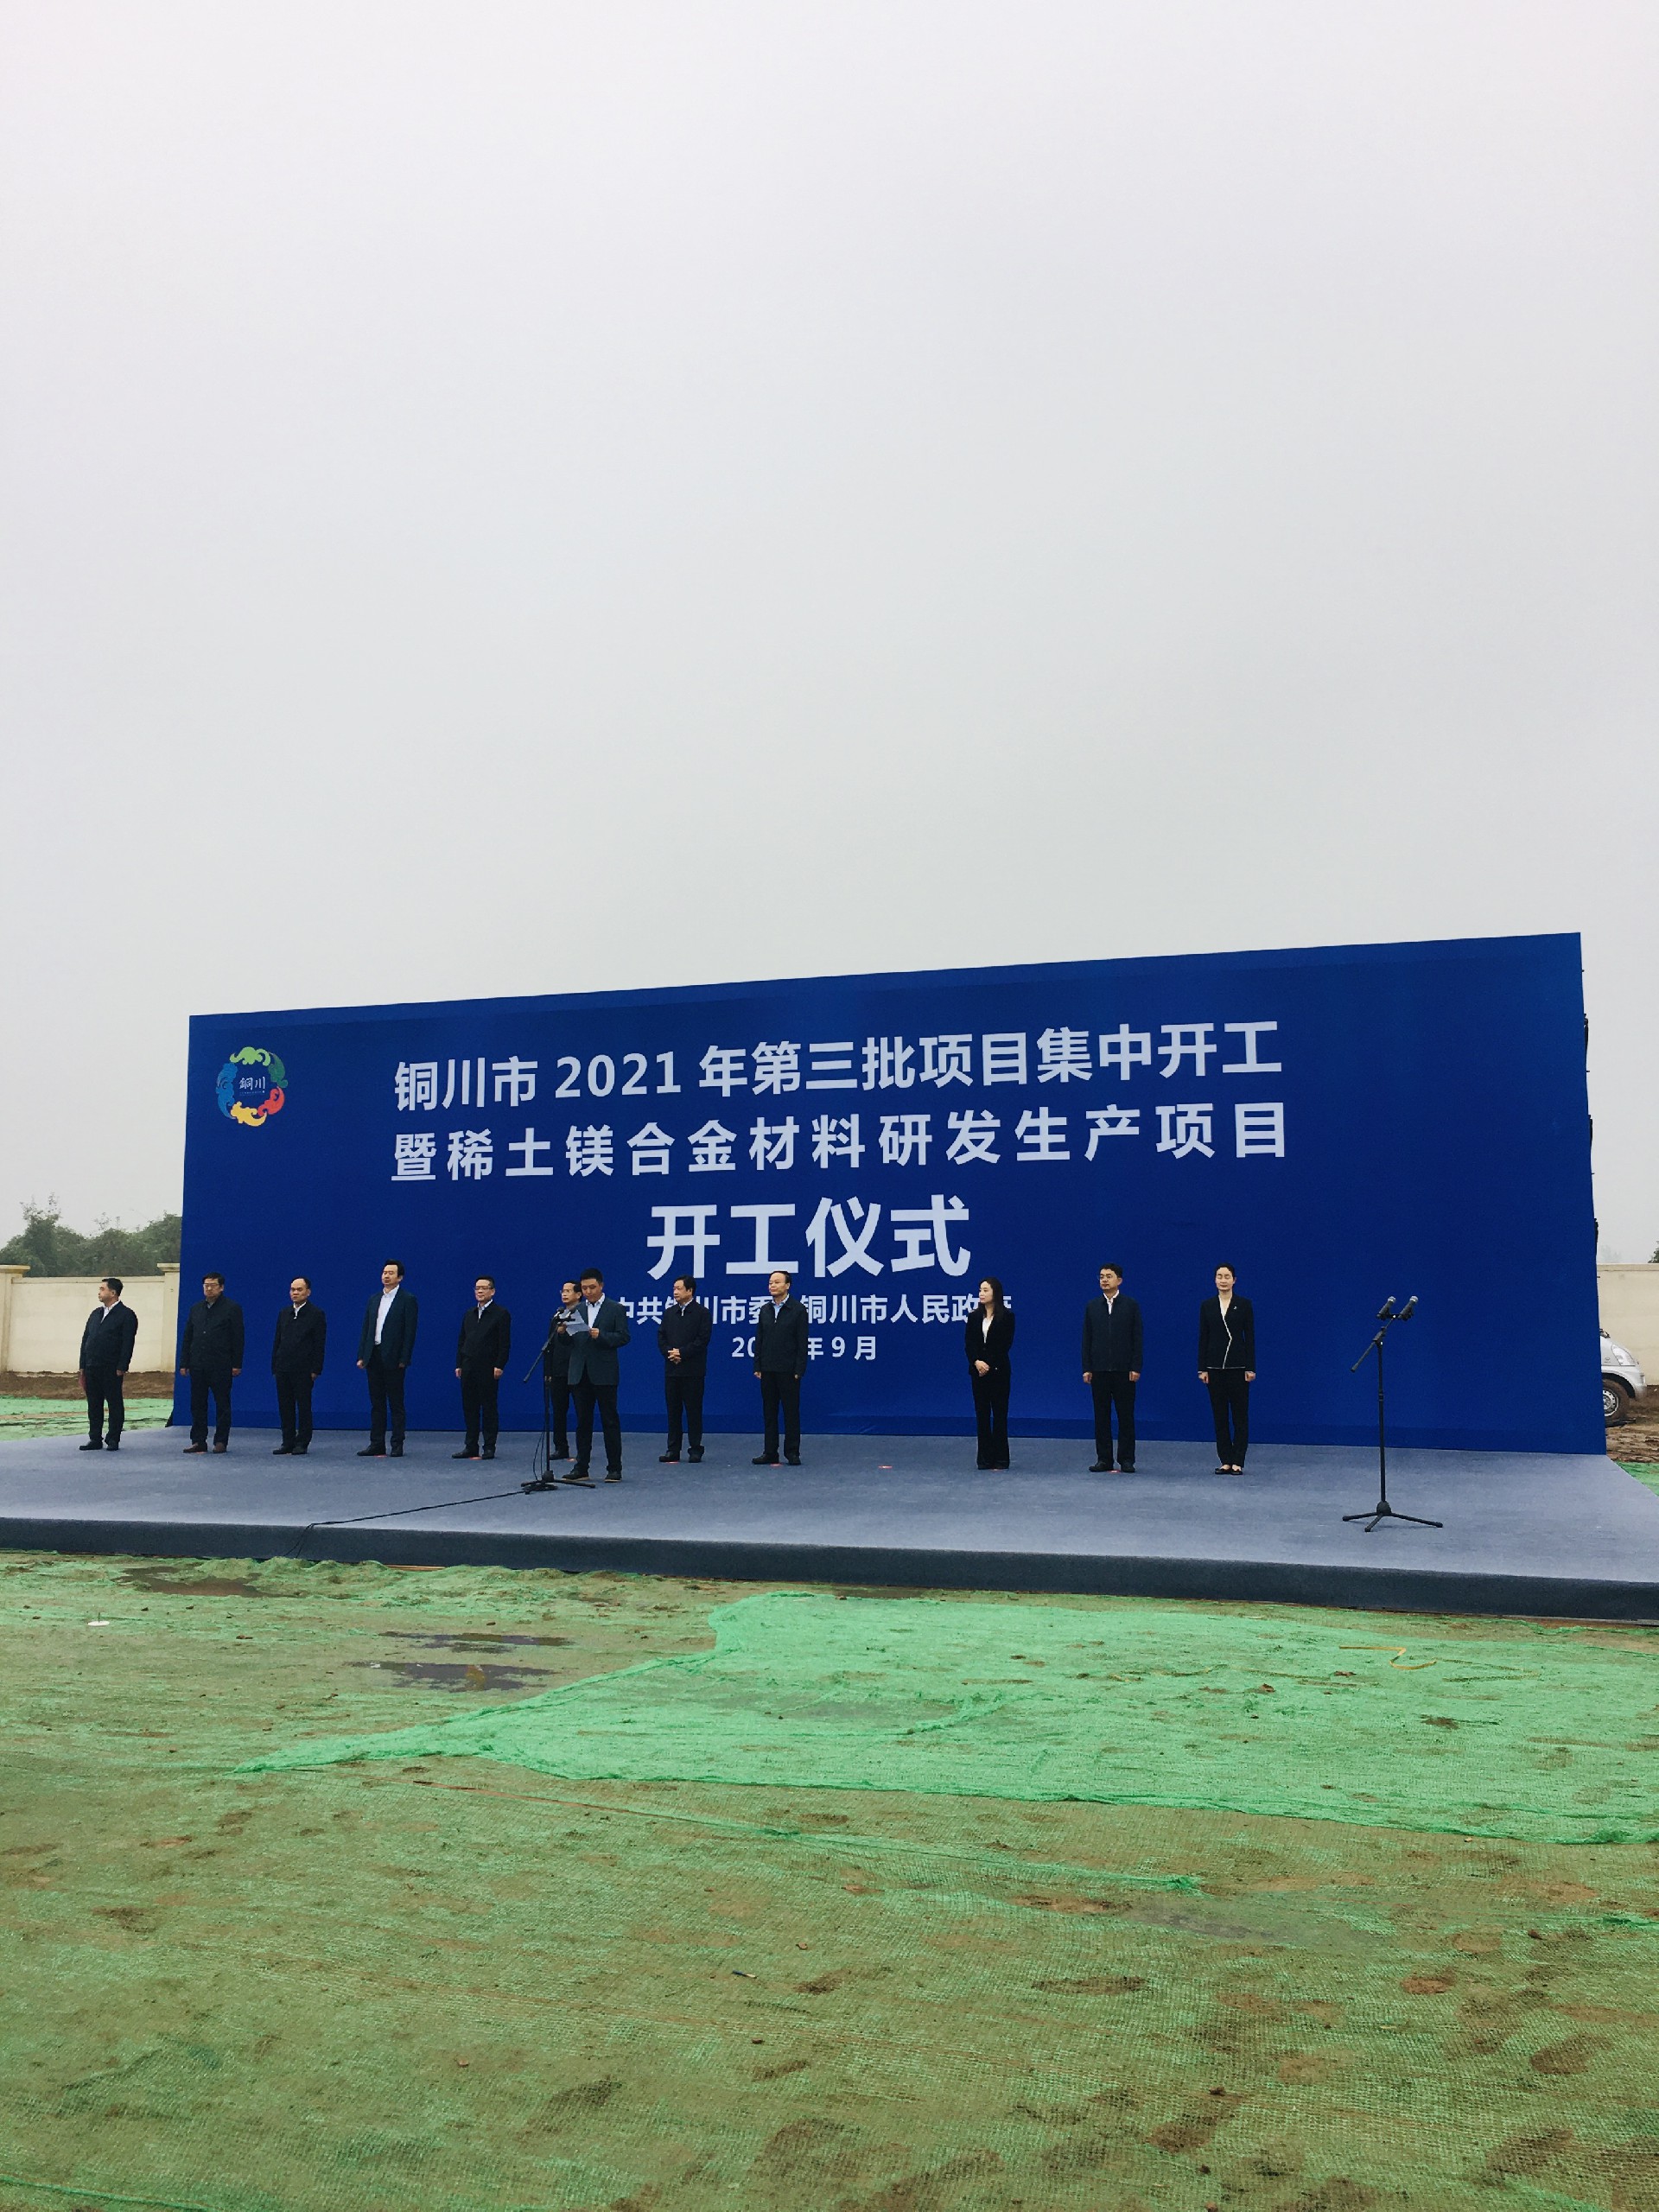 Commencement ceremony of Tongchuan new factory